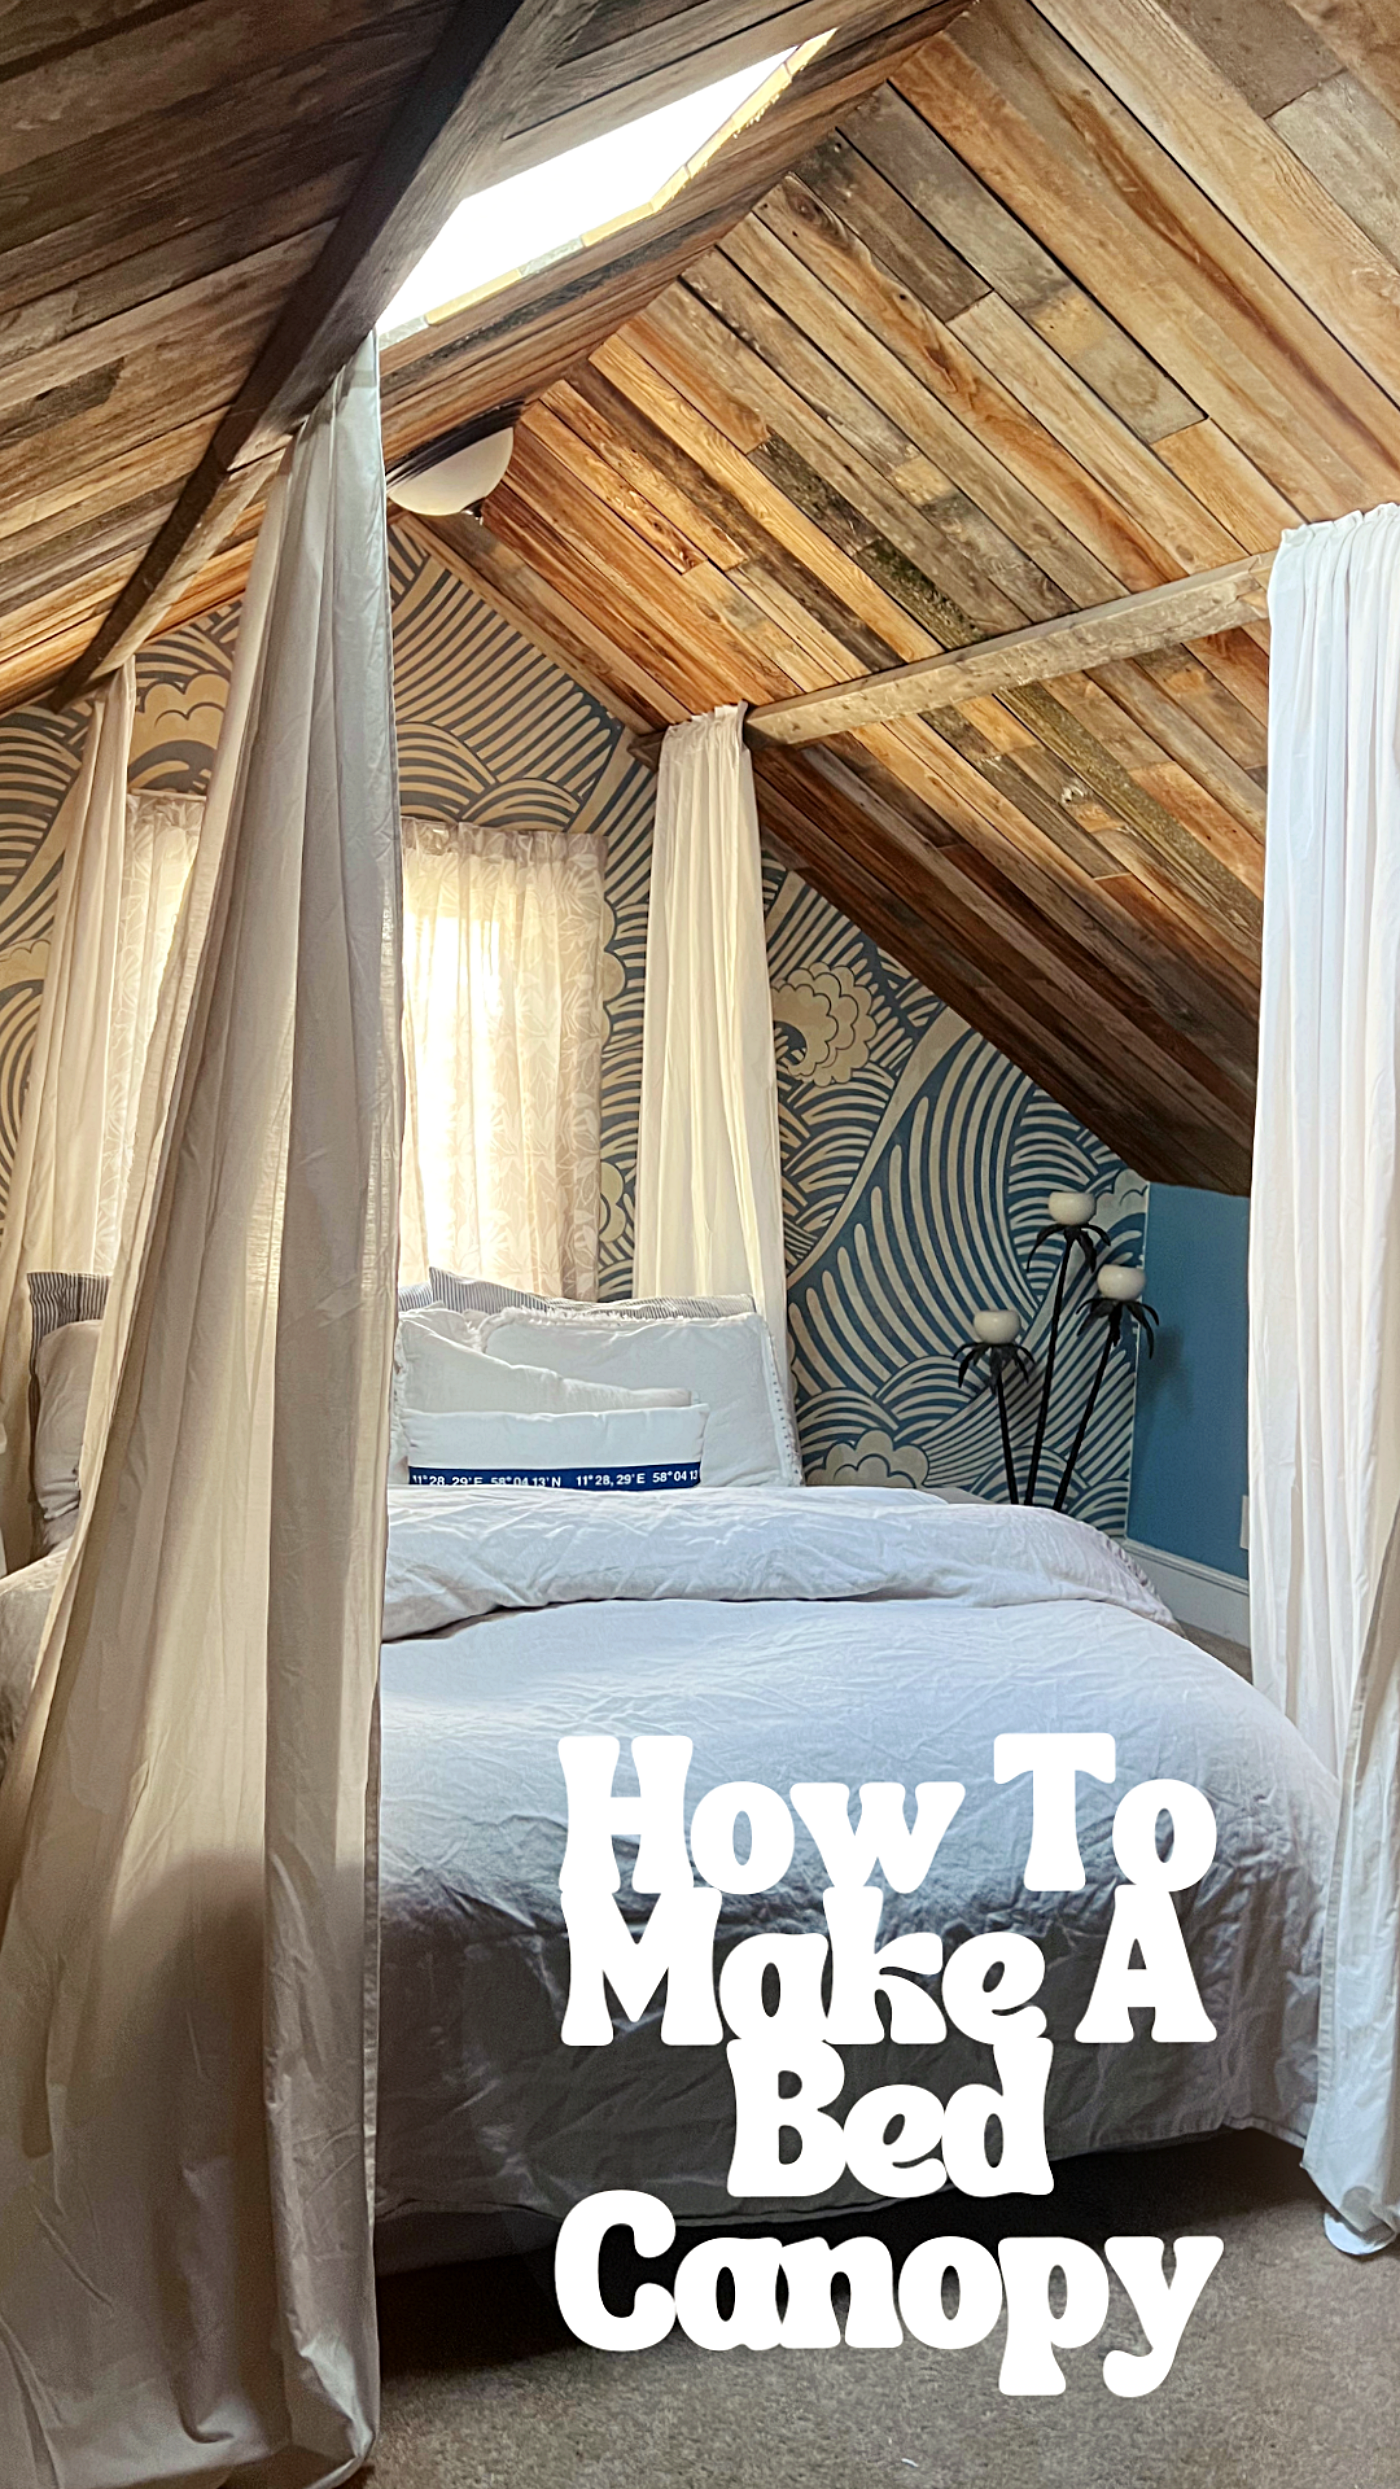 How to Make a Bed Canopy